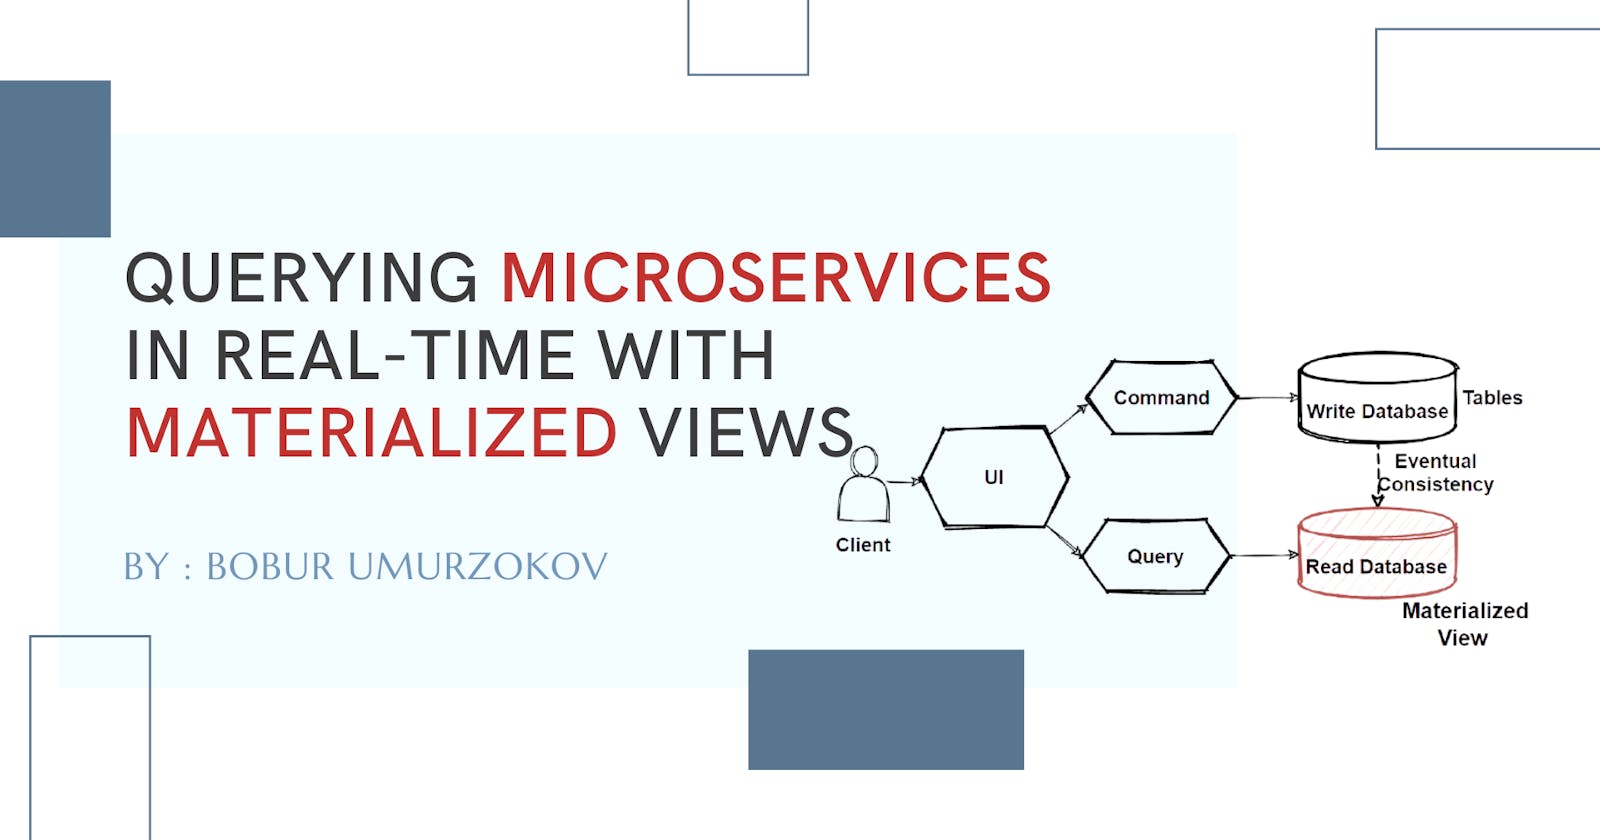 Querying microservices in real-time with materialized views